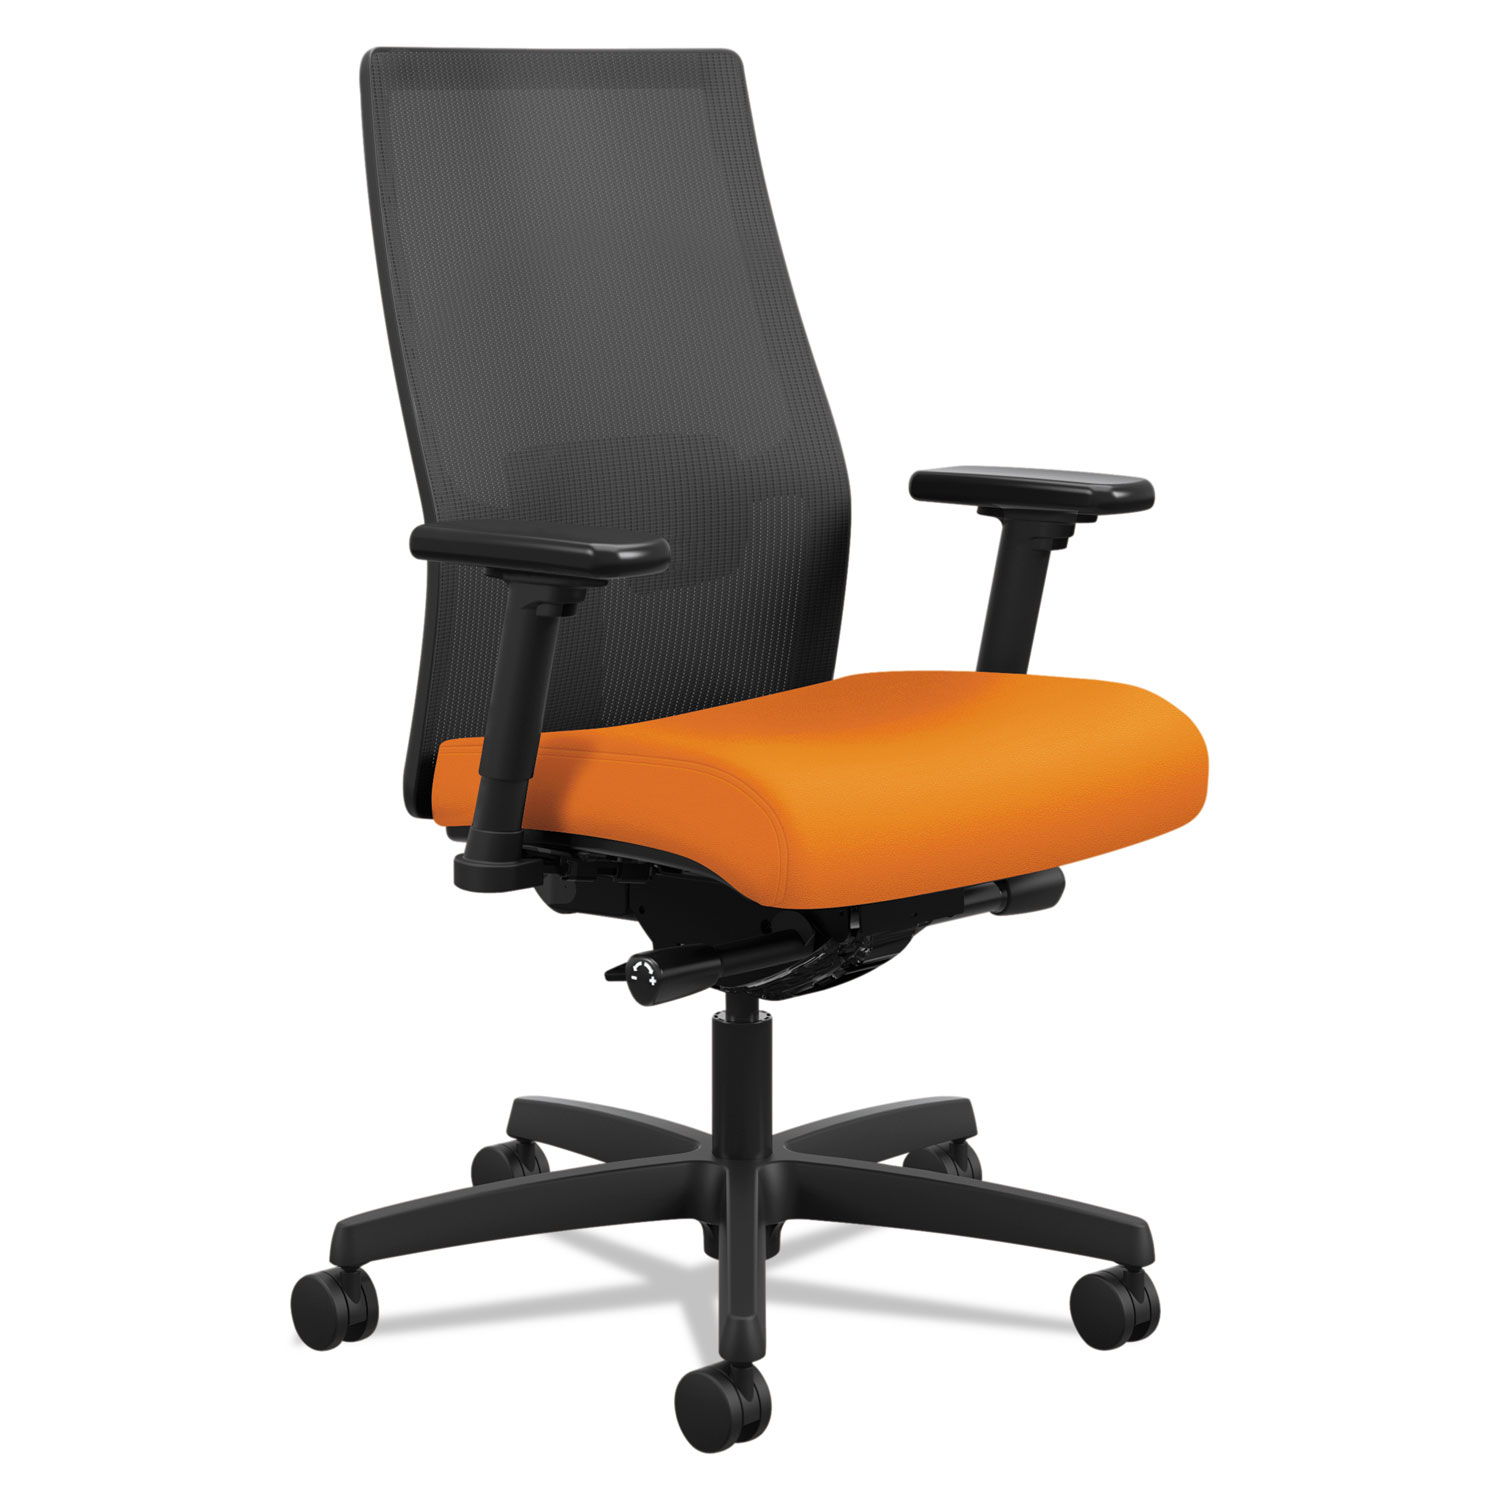  HON HONI2M2AMLC47TK Ignition 2.0 4-Way Stretch Mid-Back Mesh Task Chair, Supports up to 300 lbs., Apricot Seat, Black Back/Base (HONI2M2AMLC47TK) 